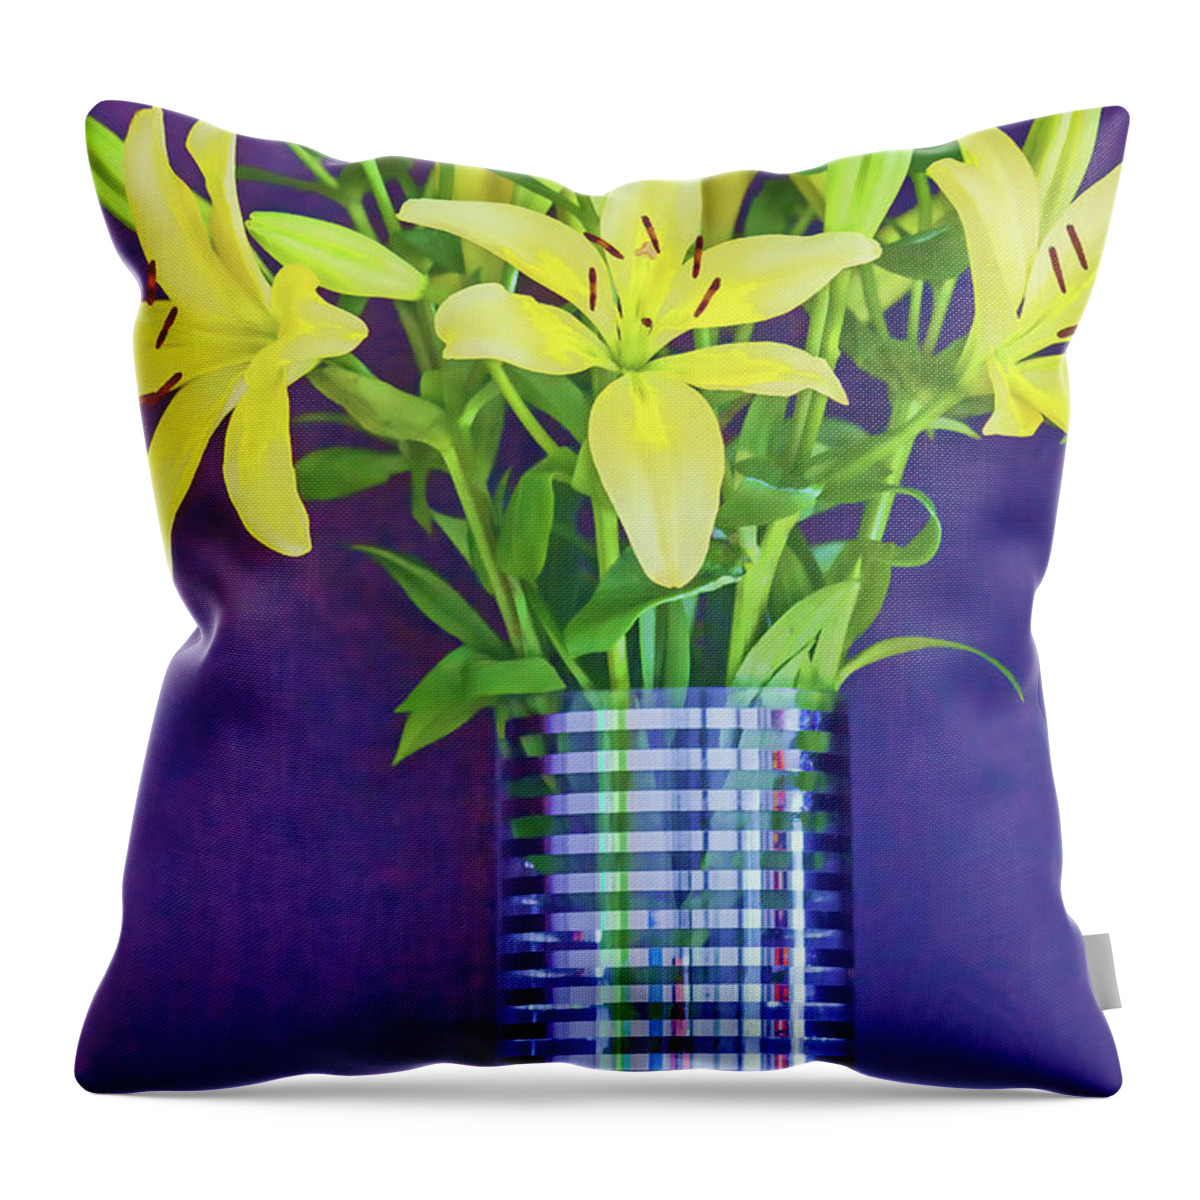 Lilies Throw Pillow featuring the photograph Yellow Lilies by Roberta Byram